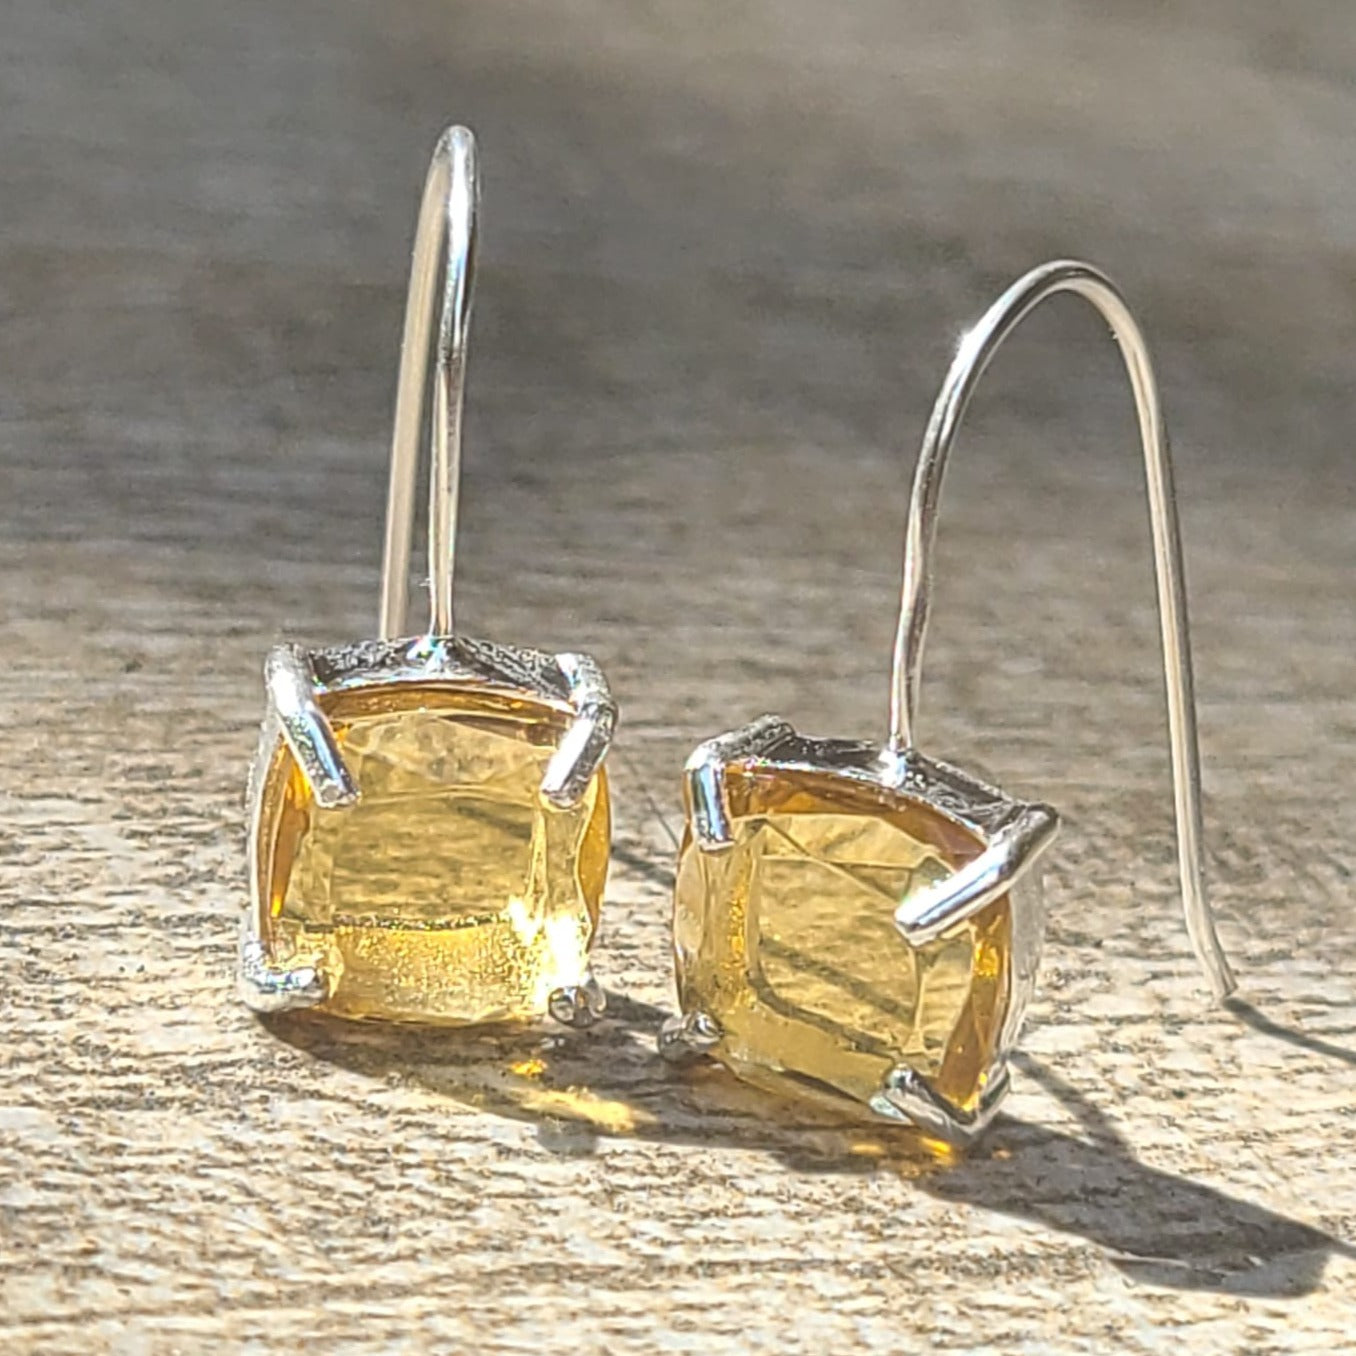 Citrine and Gold Filled Beads Earrings – Sheryl Heading Designs